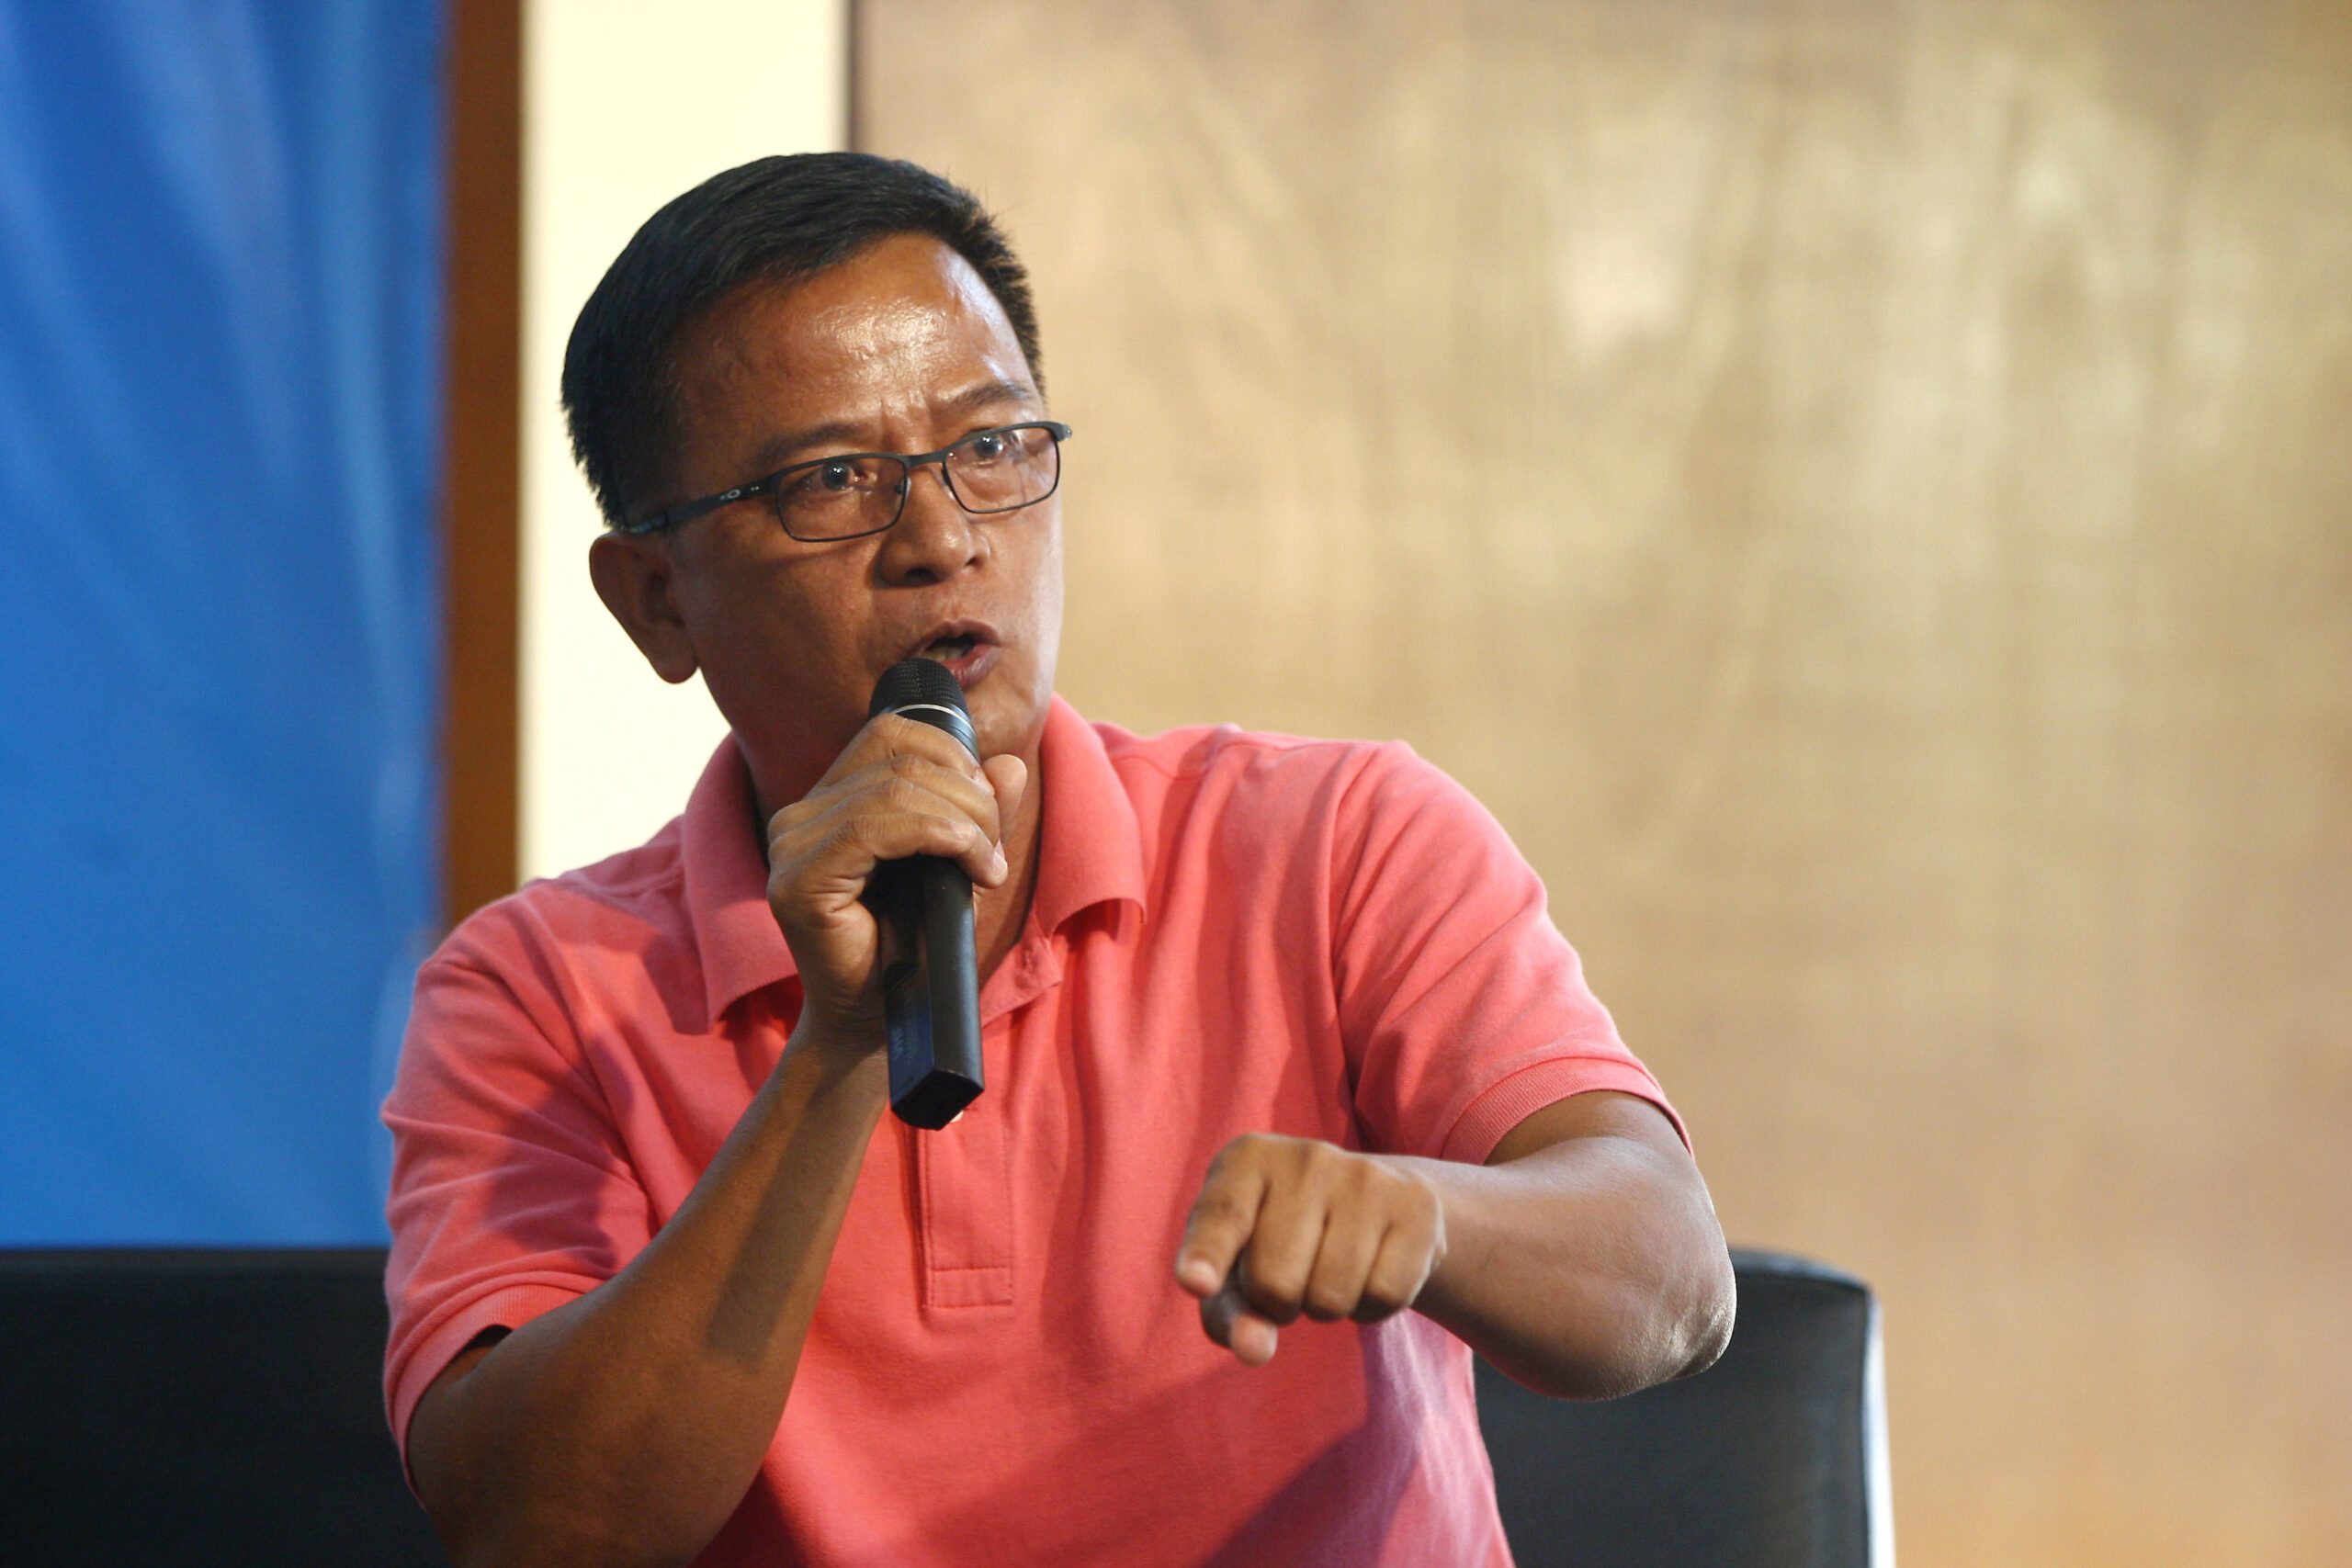 Faeldon: I never committed, tolerated corruption